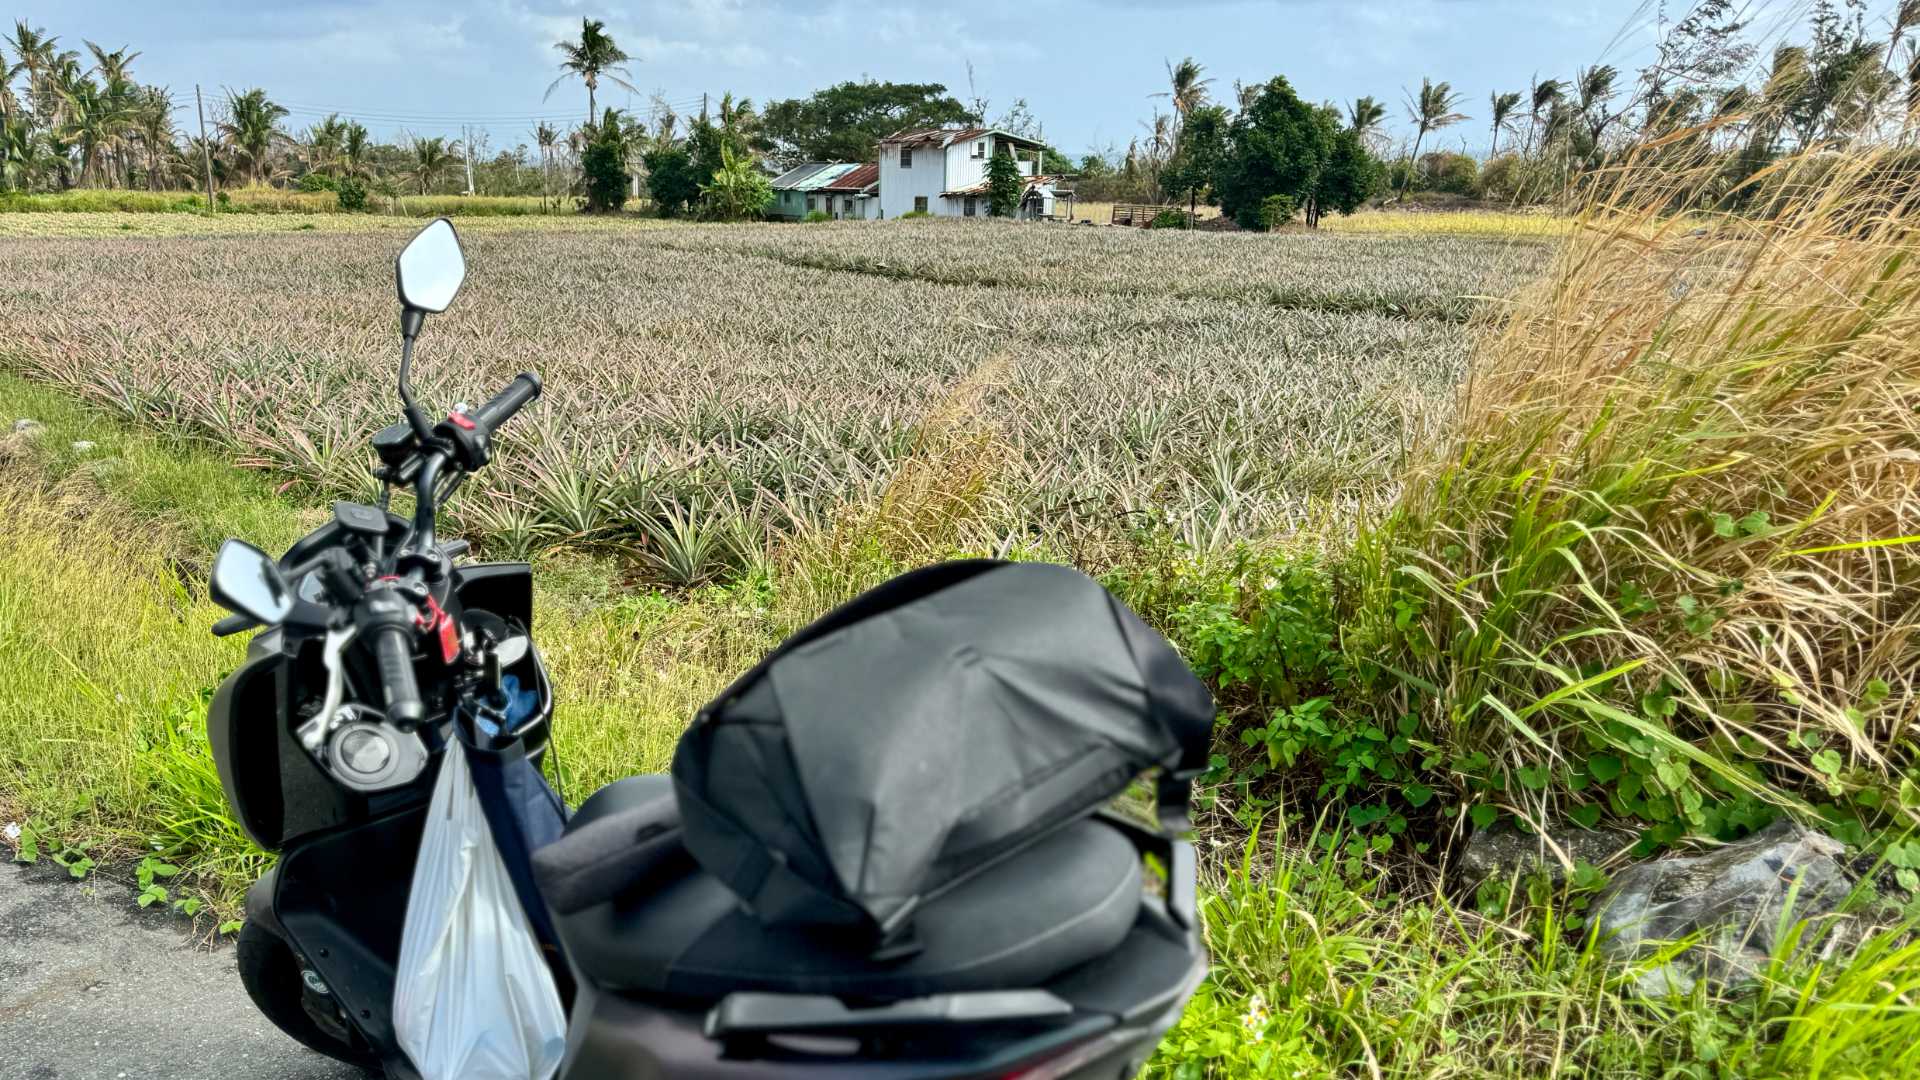 A scooter parked next to a pineapple plantation.